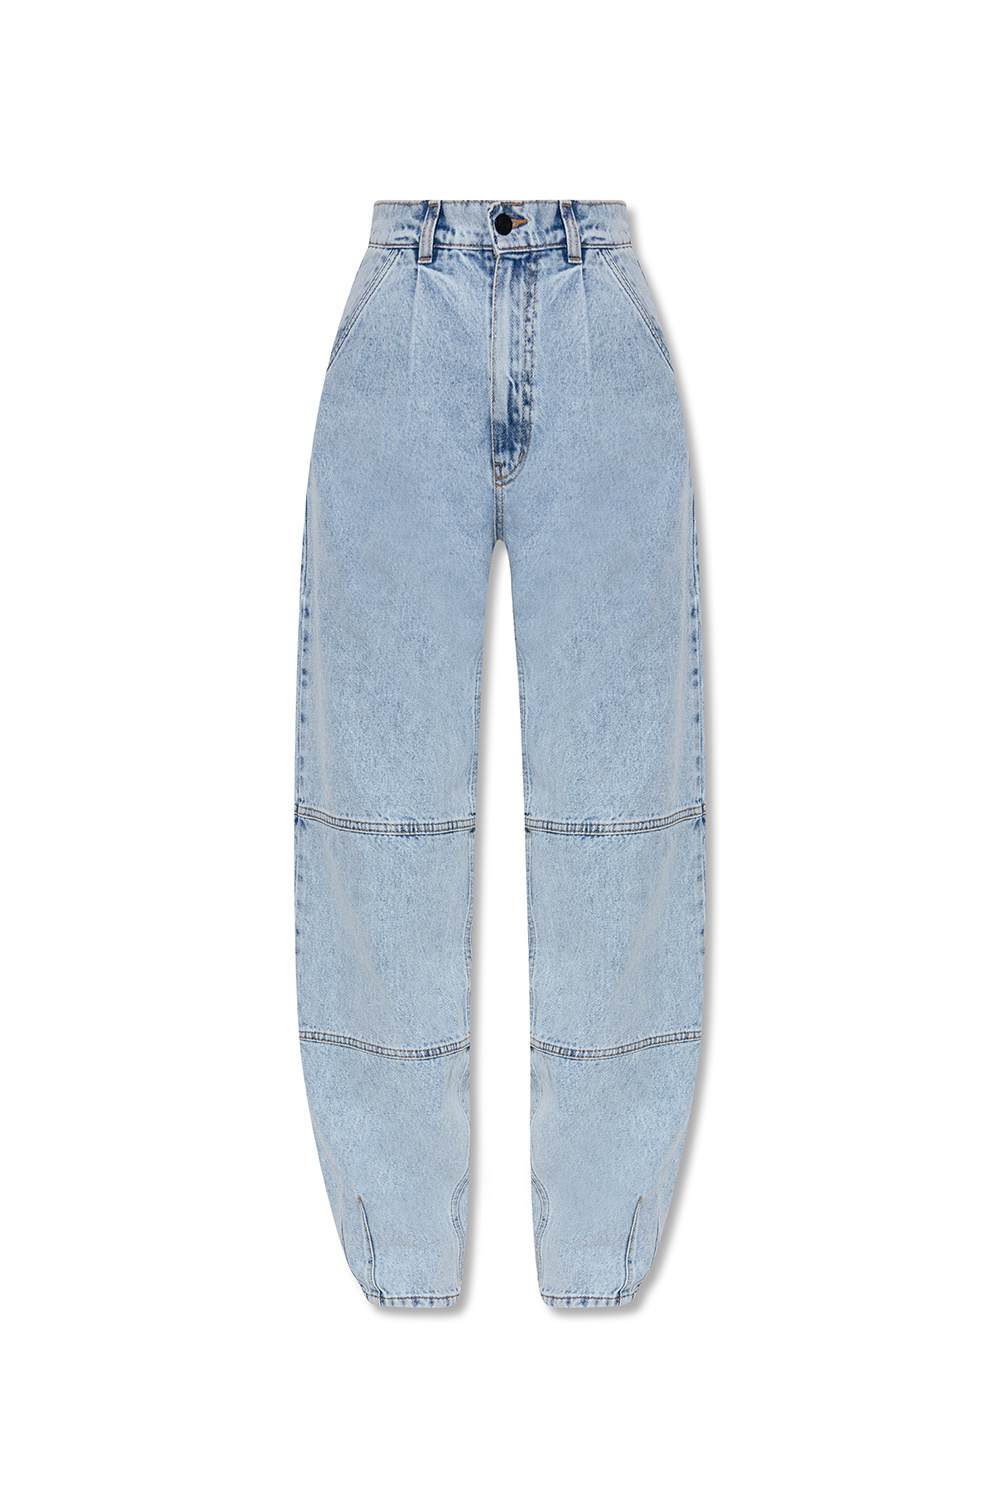 The Mannei ‘Barga’ jeans